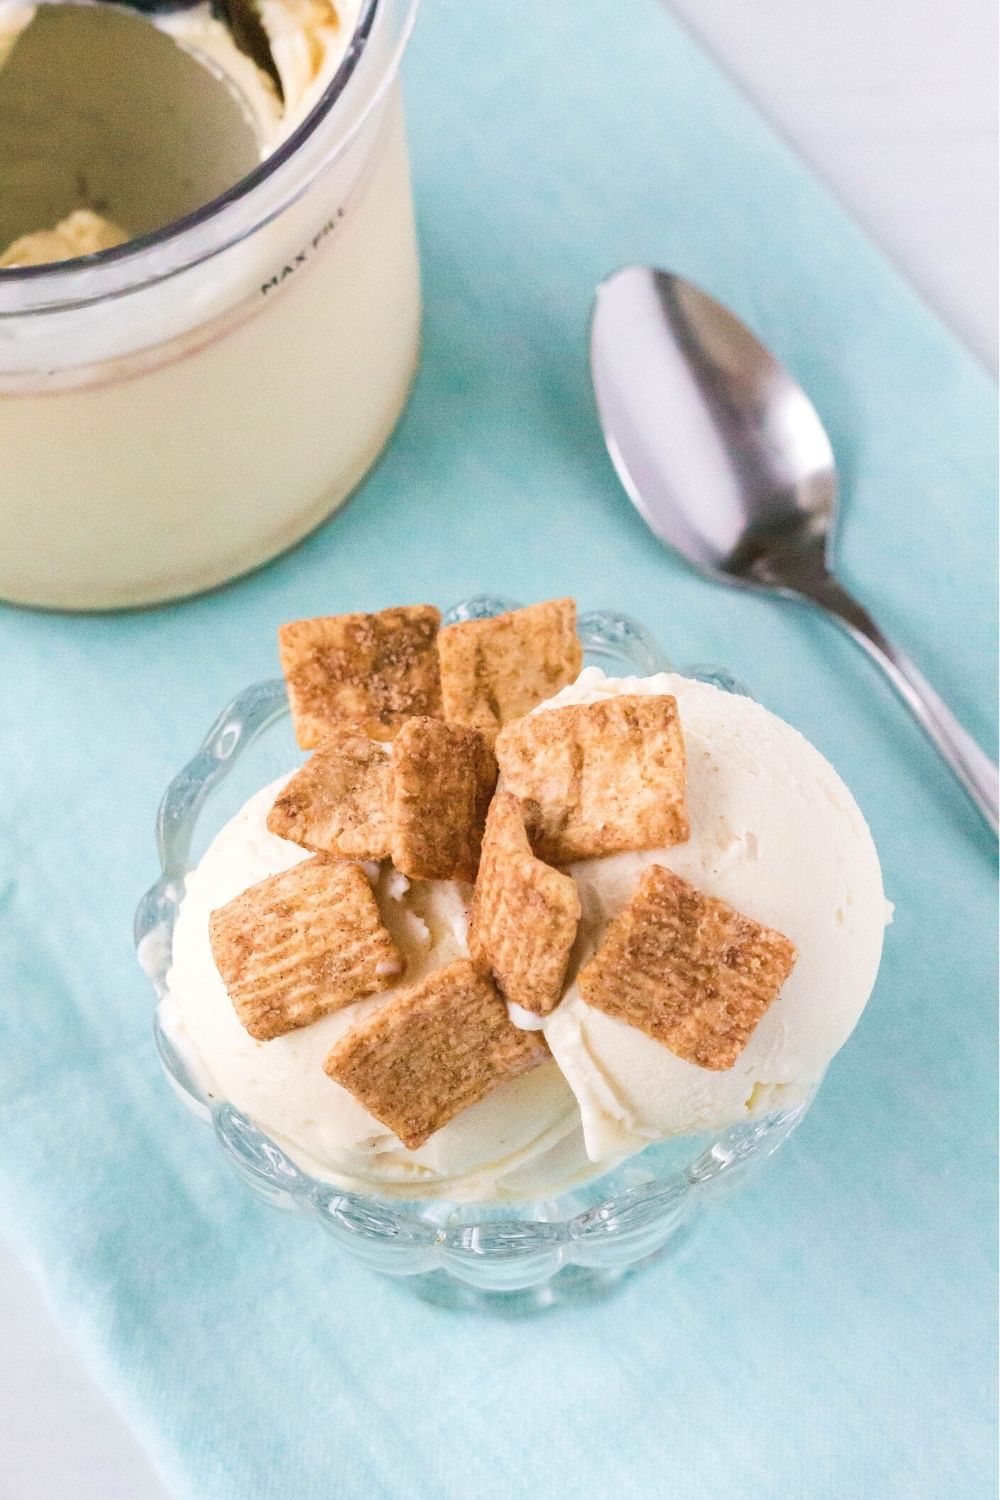 a glass dish serves Ninja Creami Cinnamon Toast Crunch Cereal ice cream. The pint container and a spoon are in the background.